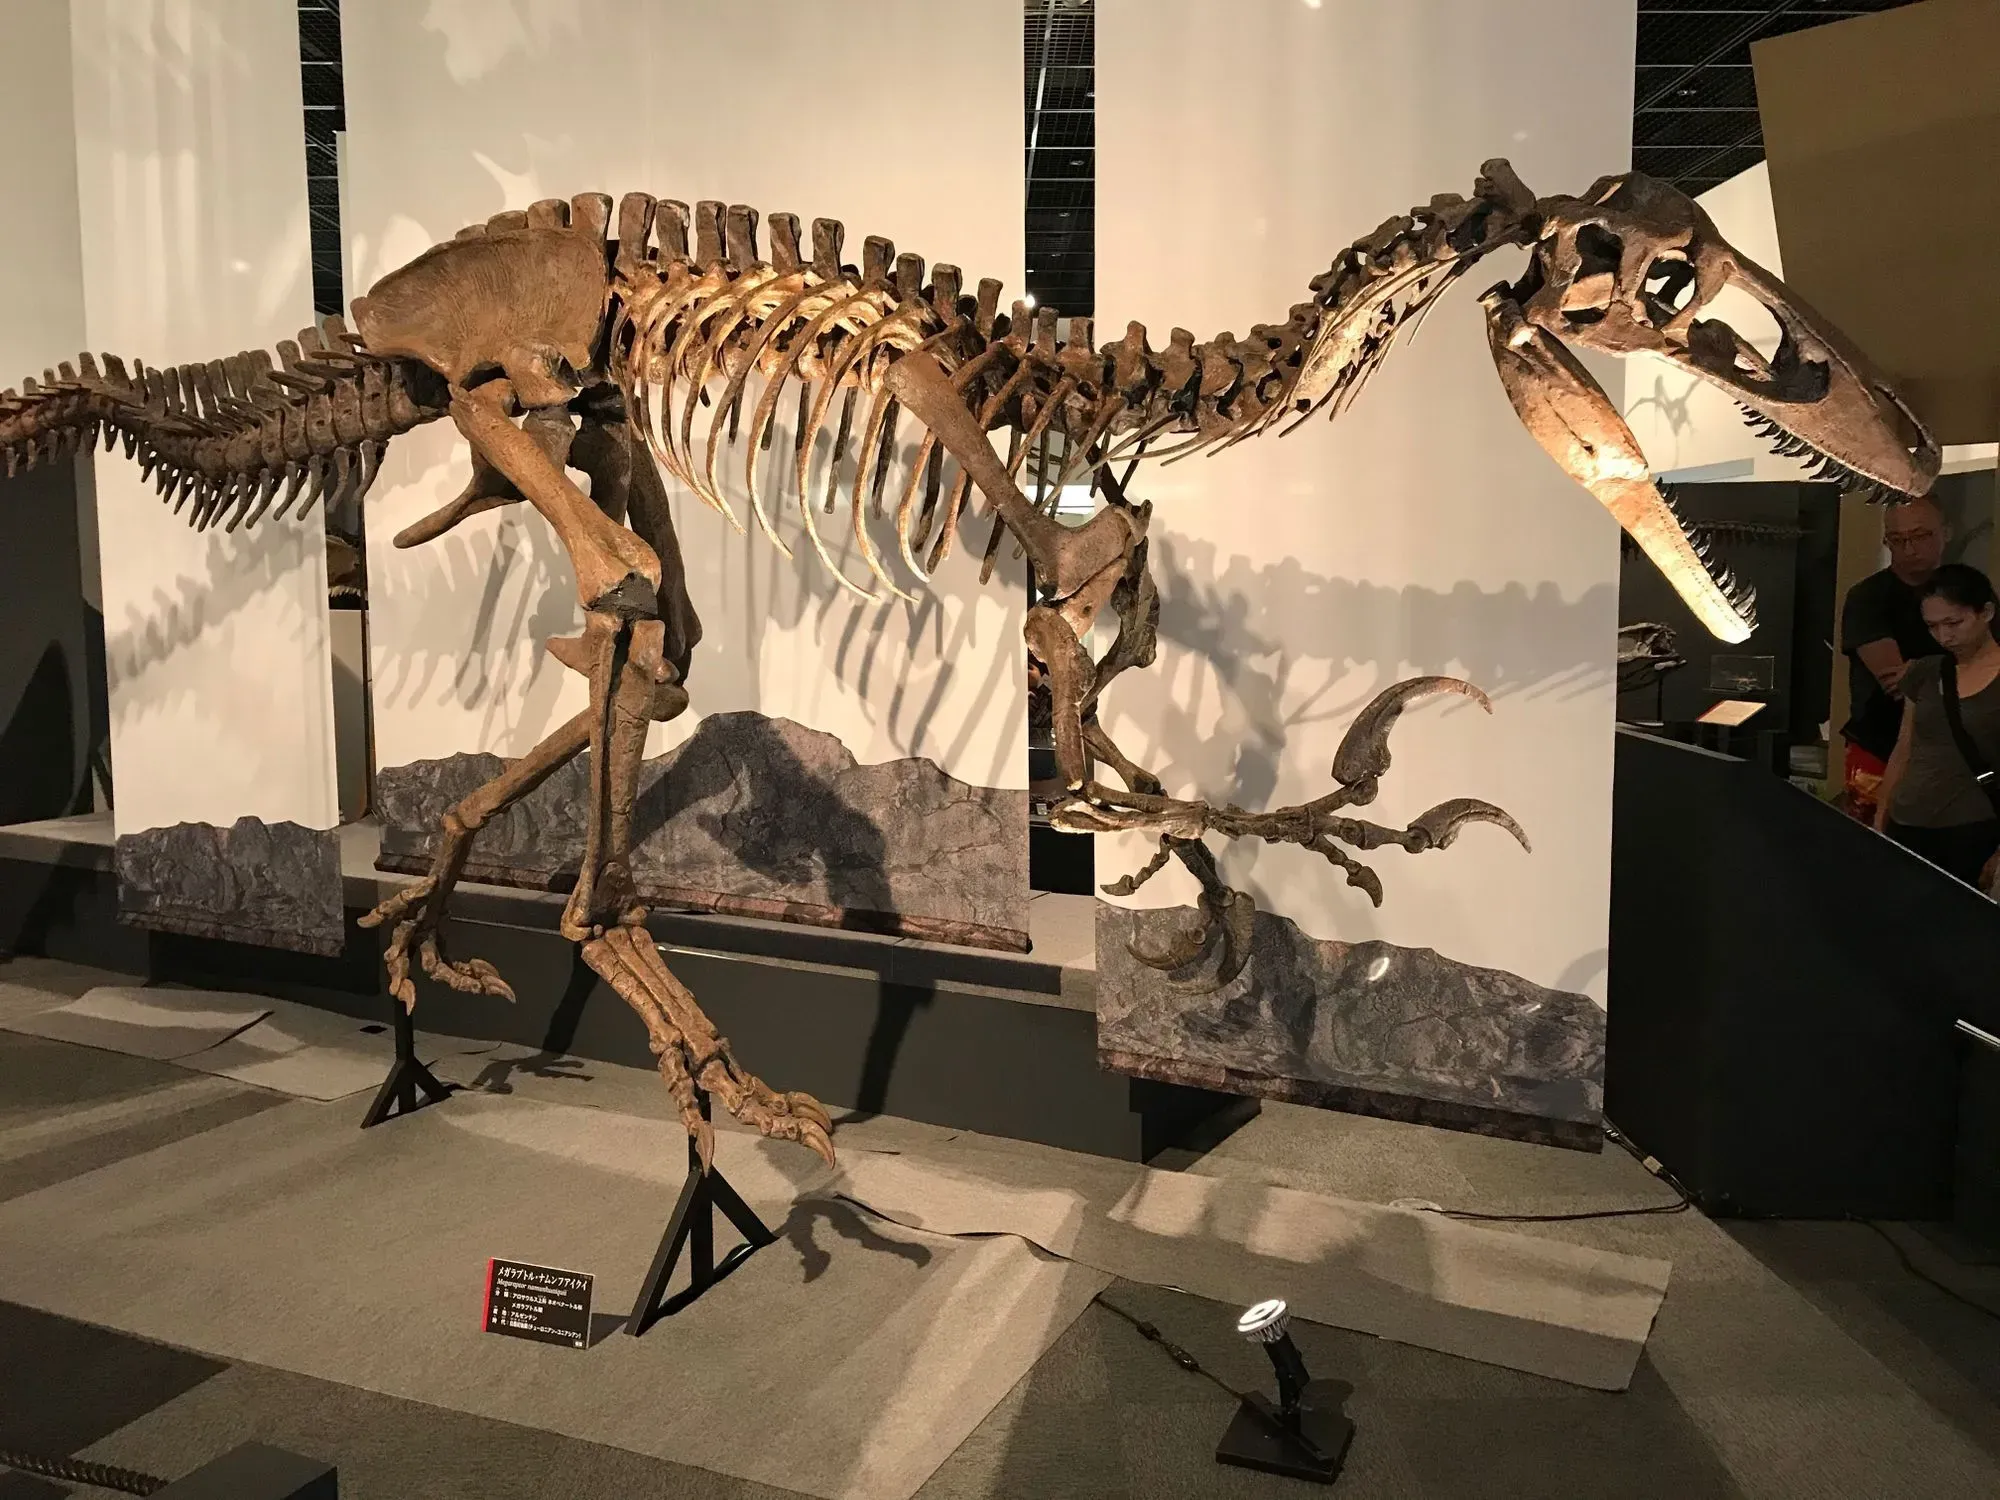 Interesting things you shouldn't miss out about the giant Megaraptor.